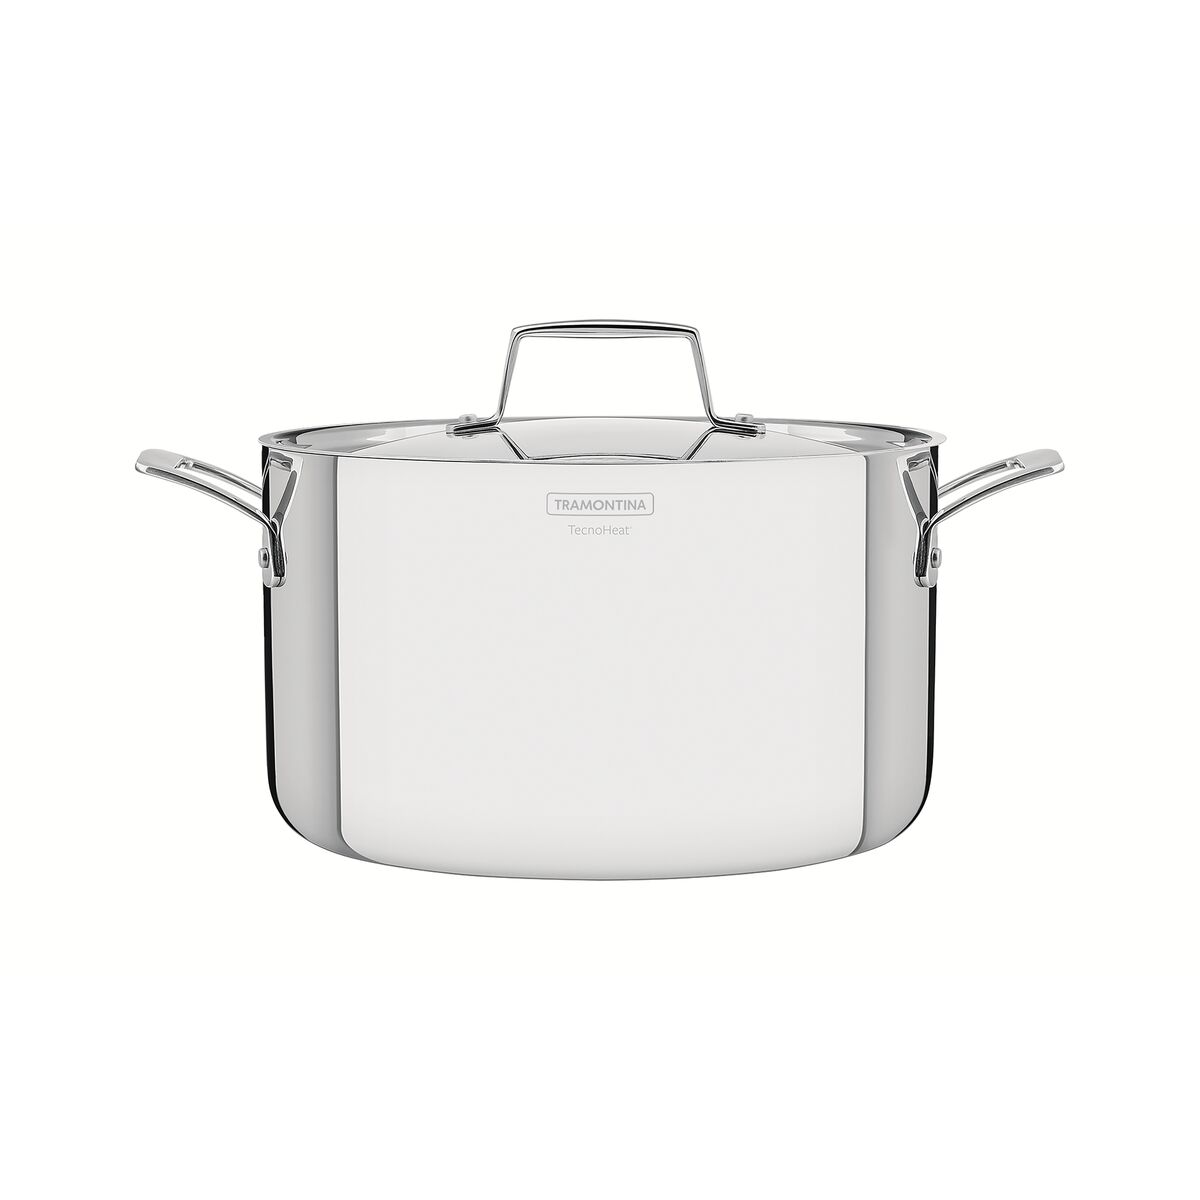 Tramontina Grano 20 cm 3.8 L stainless steel deep casserole dish with tri-ply body, lid and handles